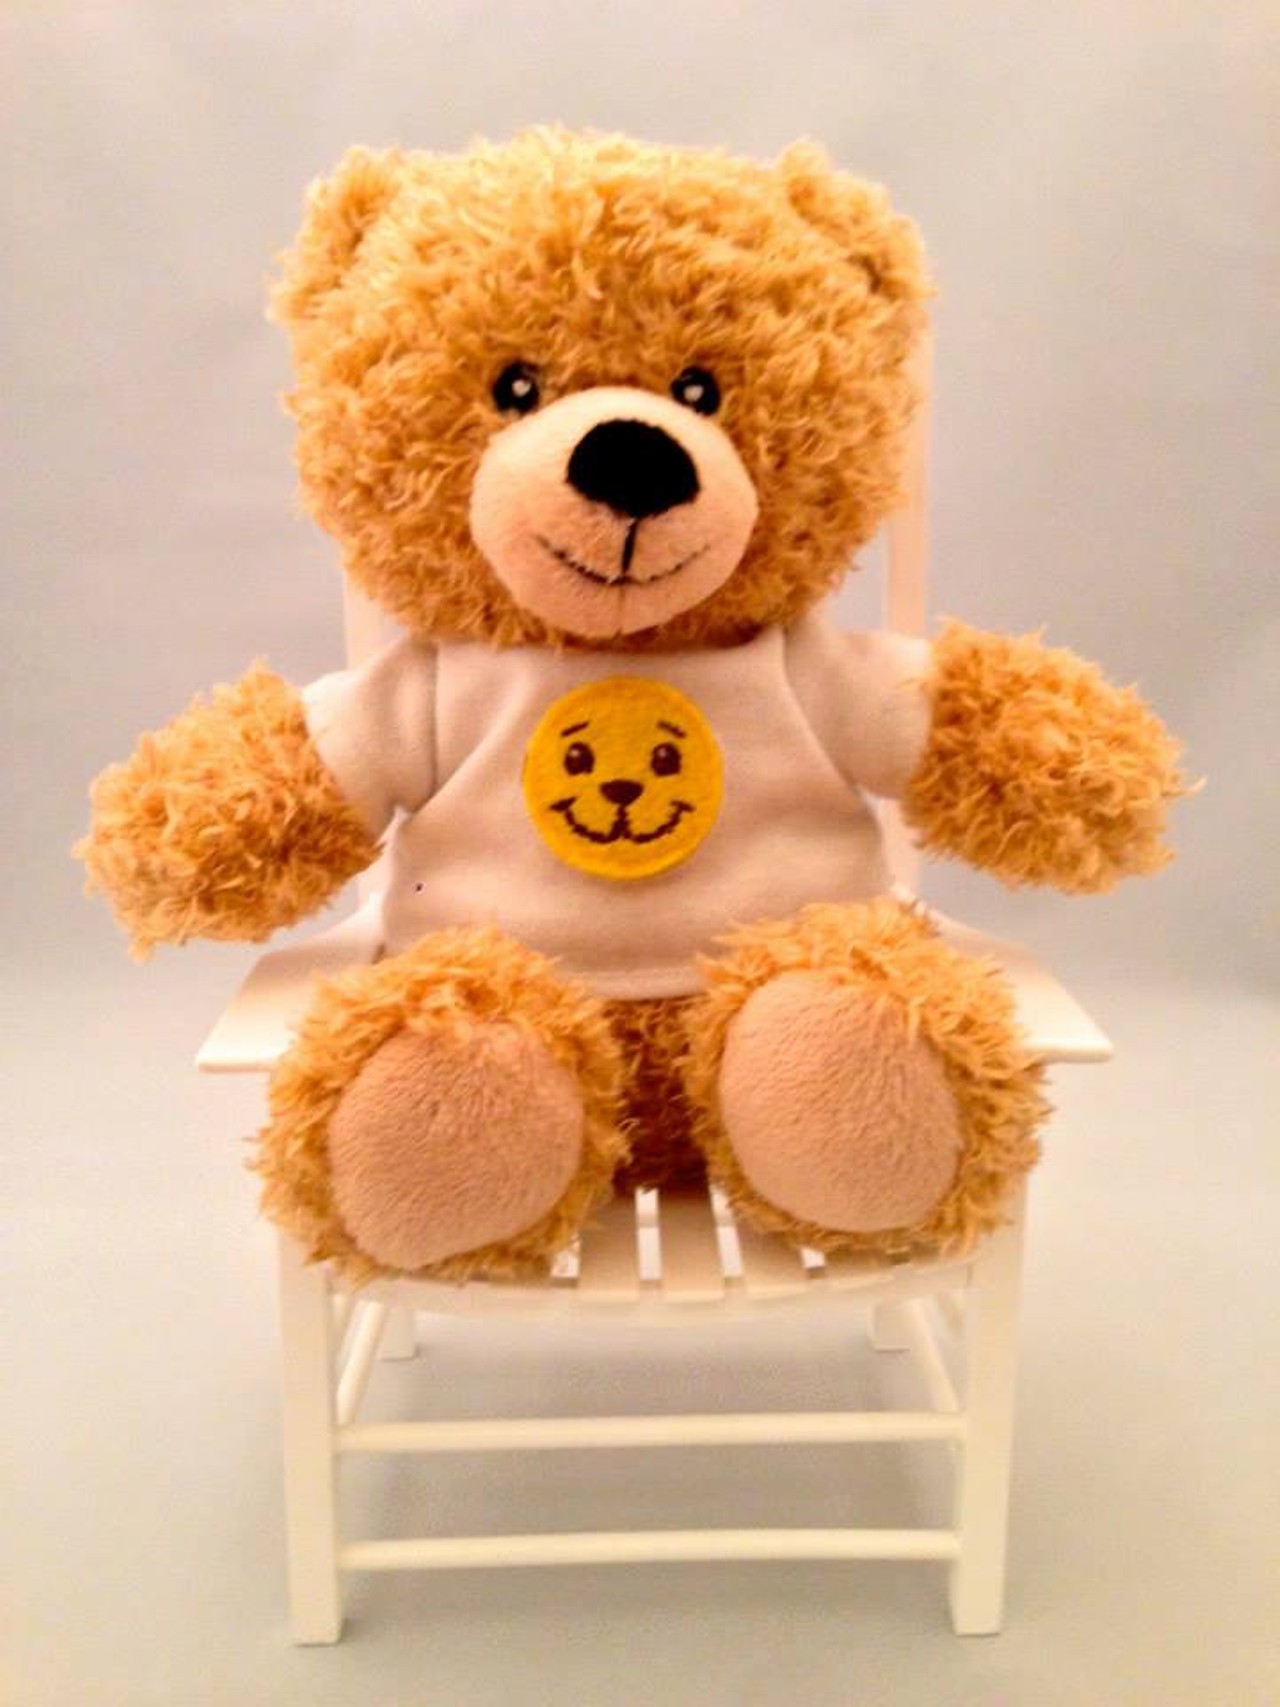 The Bear on the Chair is a toy designed to teach kids proper behavior. It's pretty simple, with a smiley face or frowny face that attaches to the bear's shirt to show the children when they're being good or bad.